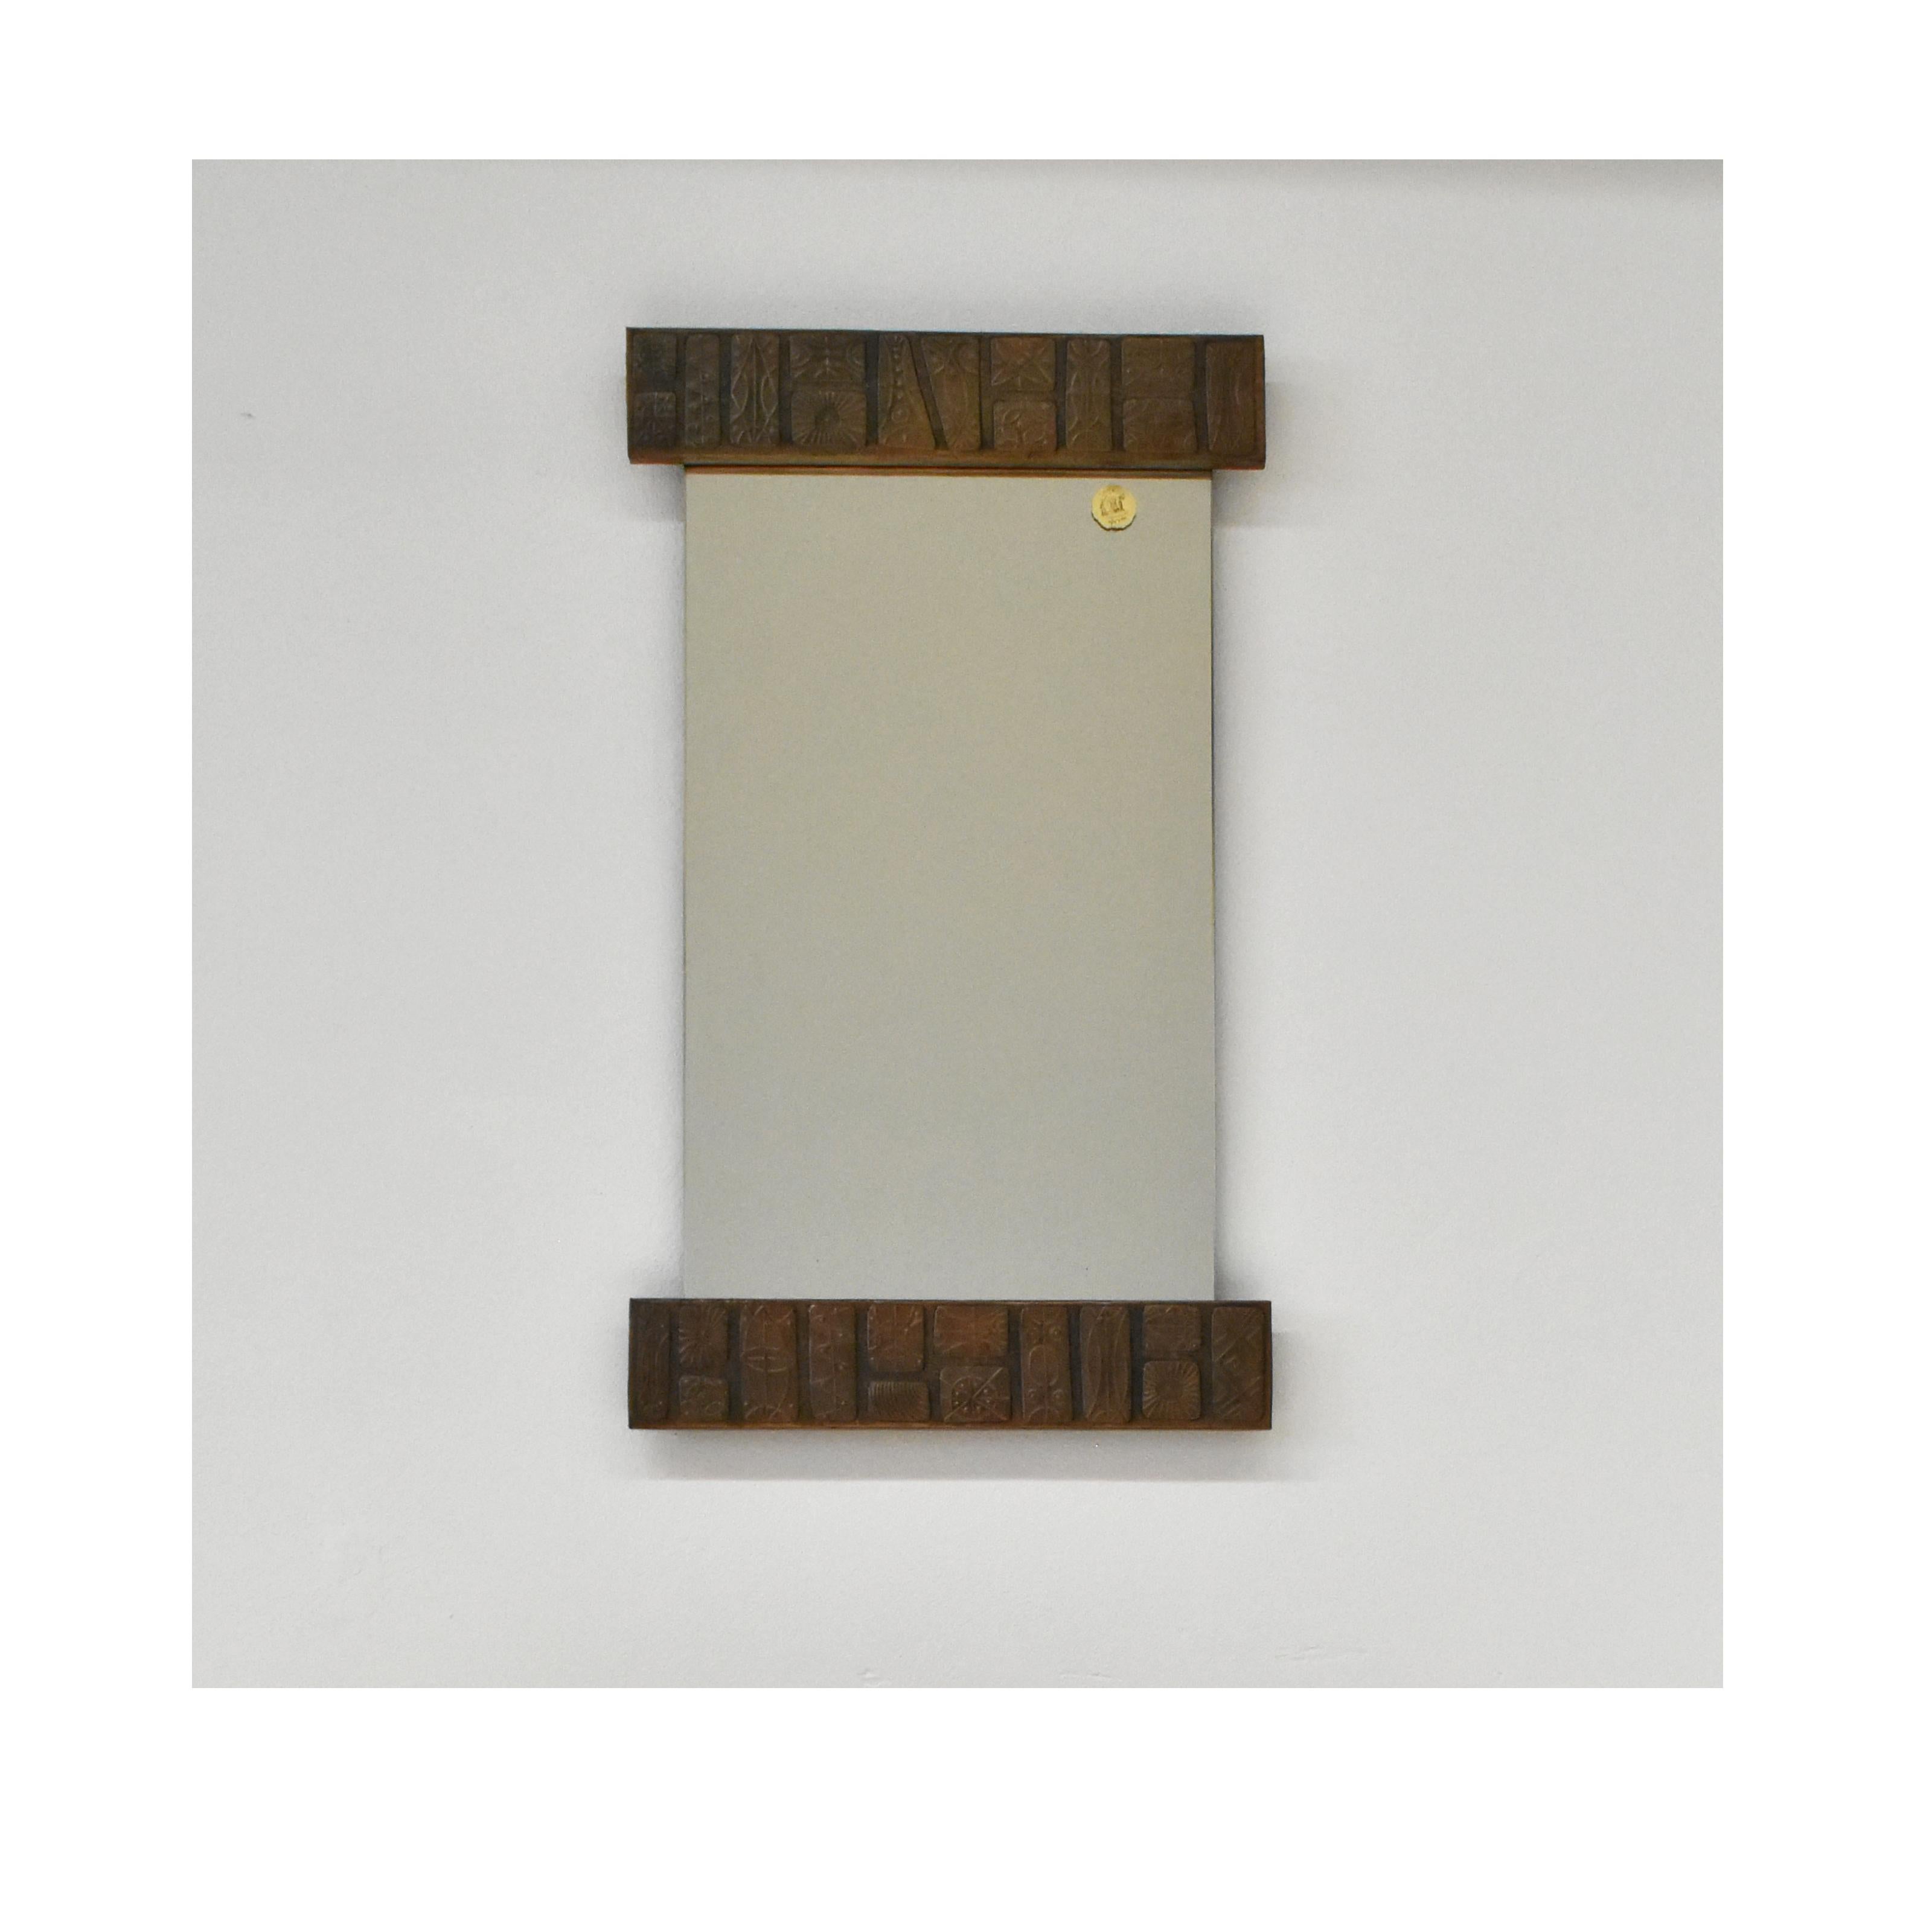 Vintage 1960s mirror, Italian manufacture, design by Santambrogio & De Berti.

On the rosewood frame it has an embossed copper decoration on the upper and lower part.
The mirror has the mark that attests its originality.

Measures
60cm x 105cm